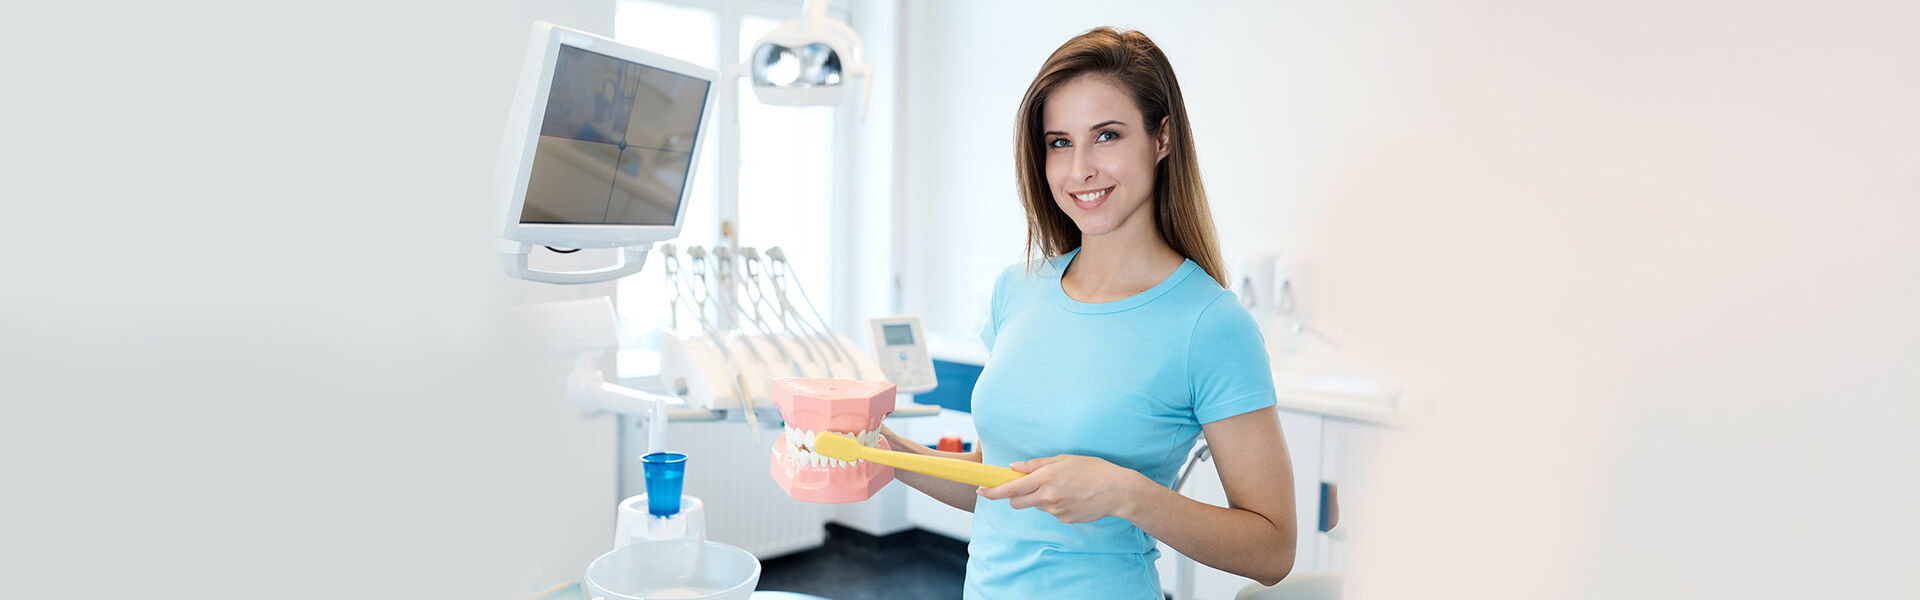 Dentures vs Veneers: Which Is a Better Choice for Me?